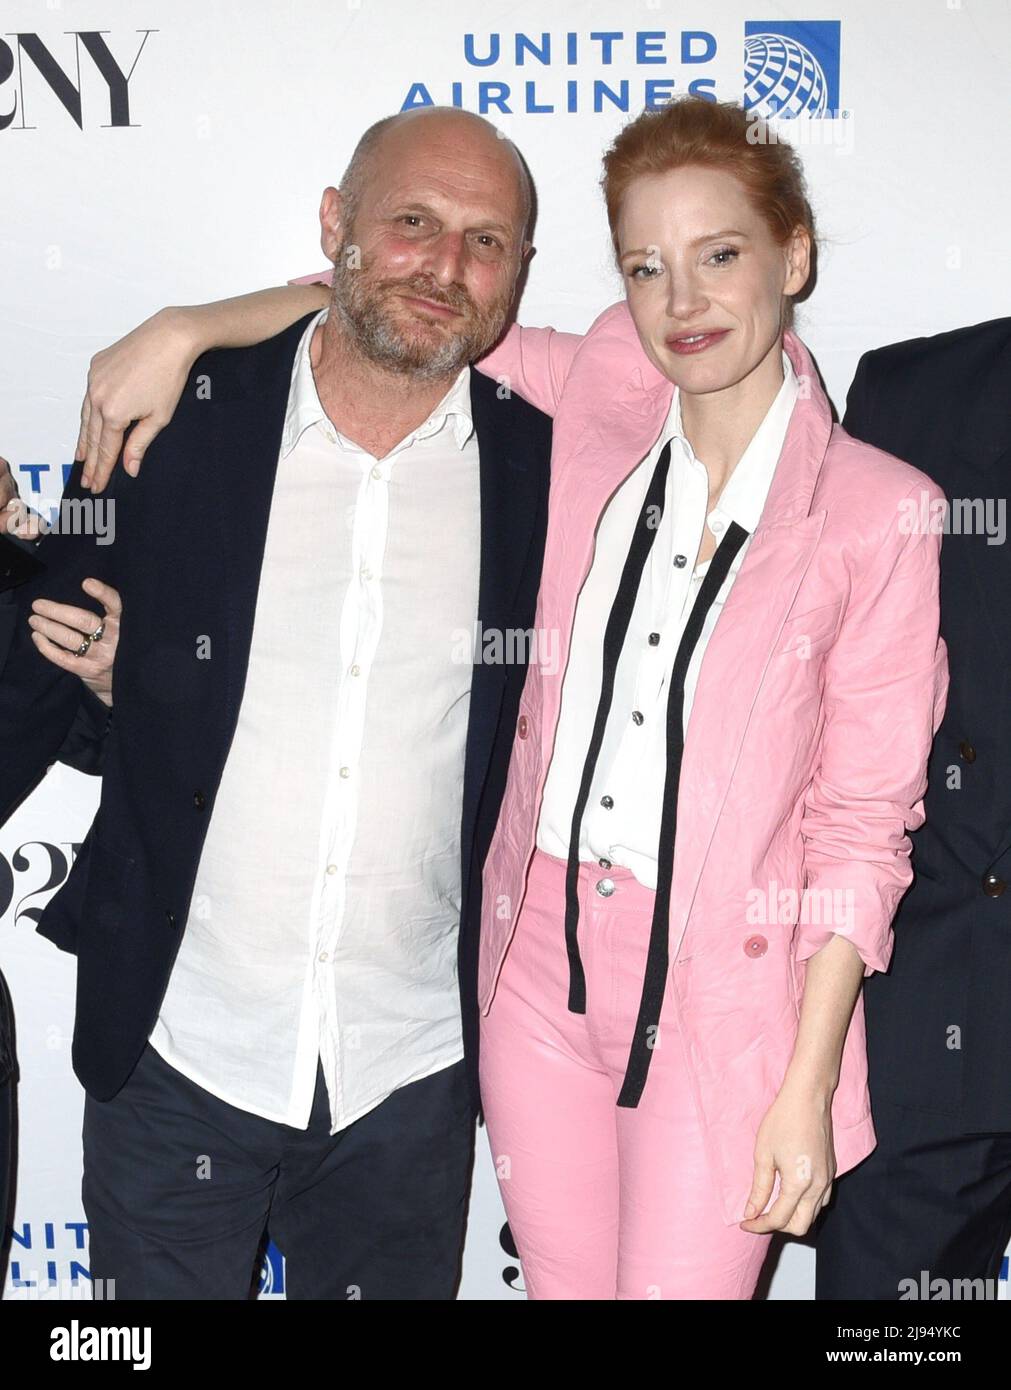 New York, NY, USA. 19th May, 2022. Hagai Levi, Jessica Chastain in attendance for HBO's SCENES FROM A MARRIAGE at 92Y, The 92nd Street Y, New York, NY May 19, 2022. Credit: Quoin Pics/Everett Collection/Alamy Live News Stock Photo